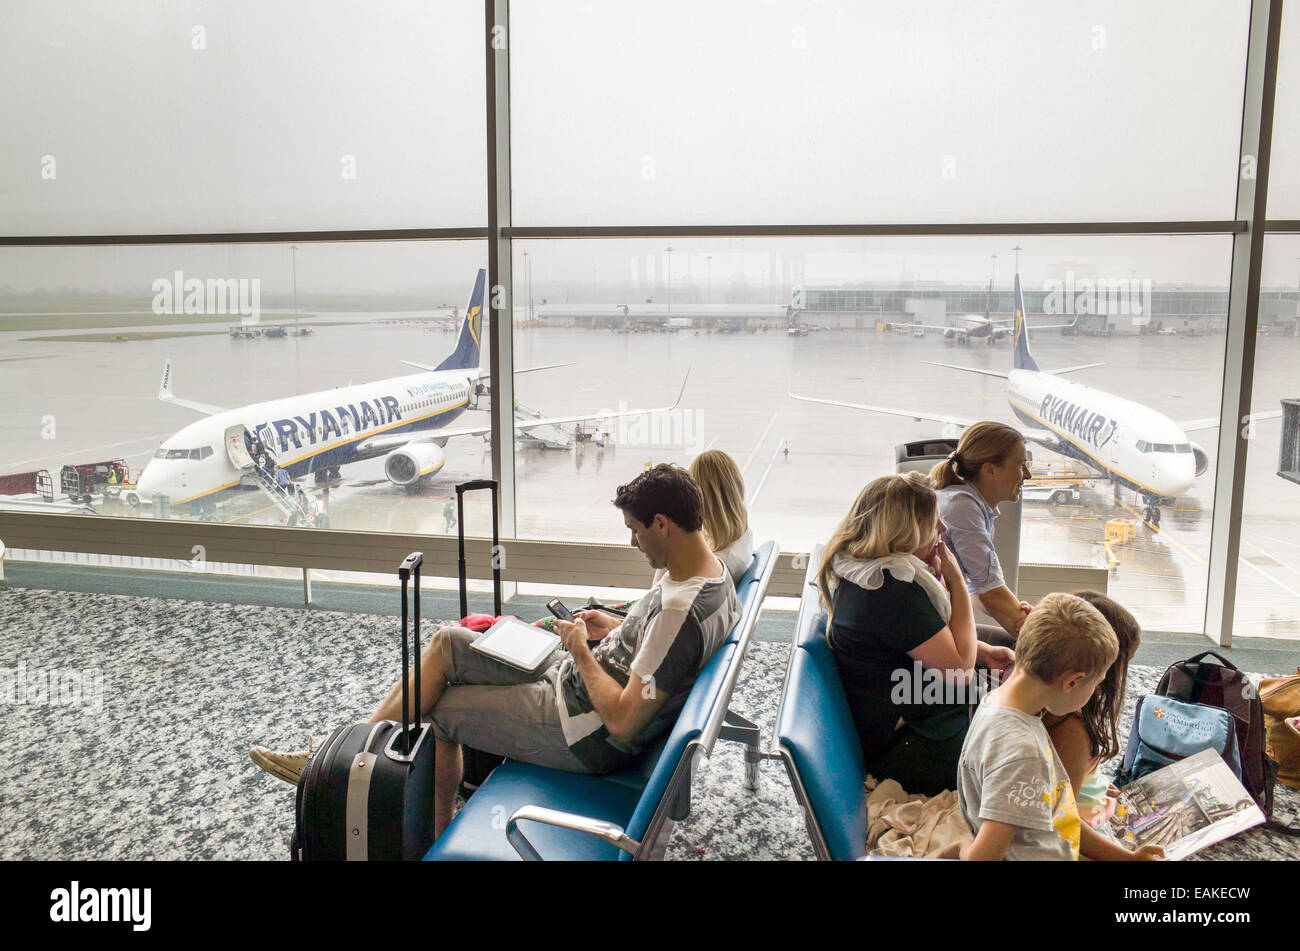 Passengers waiting to board Ryanair plane at Stansted Airport departure gate, England, UK Stock Photo